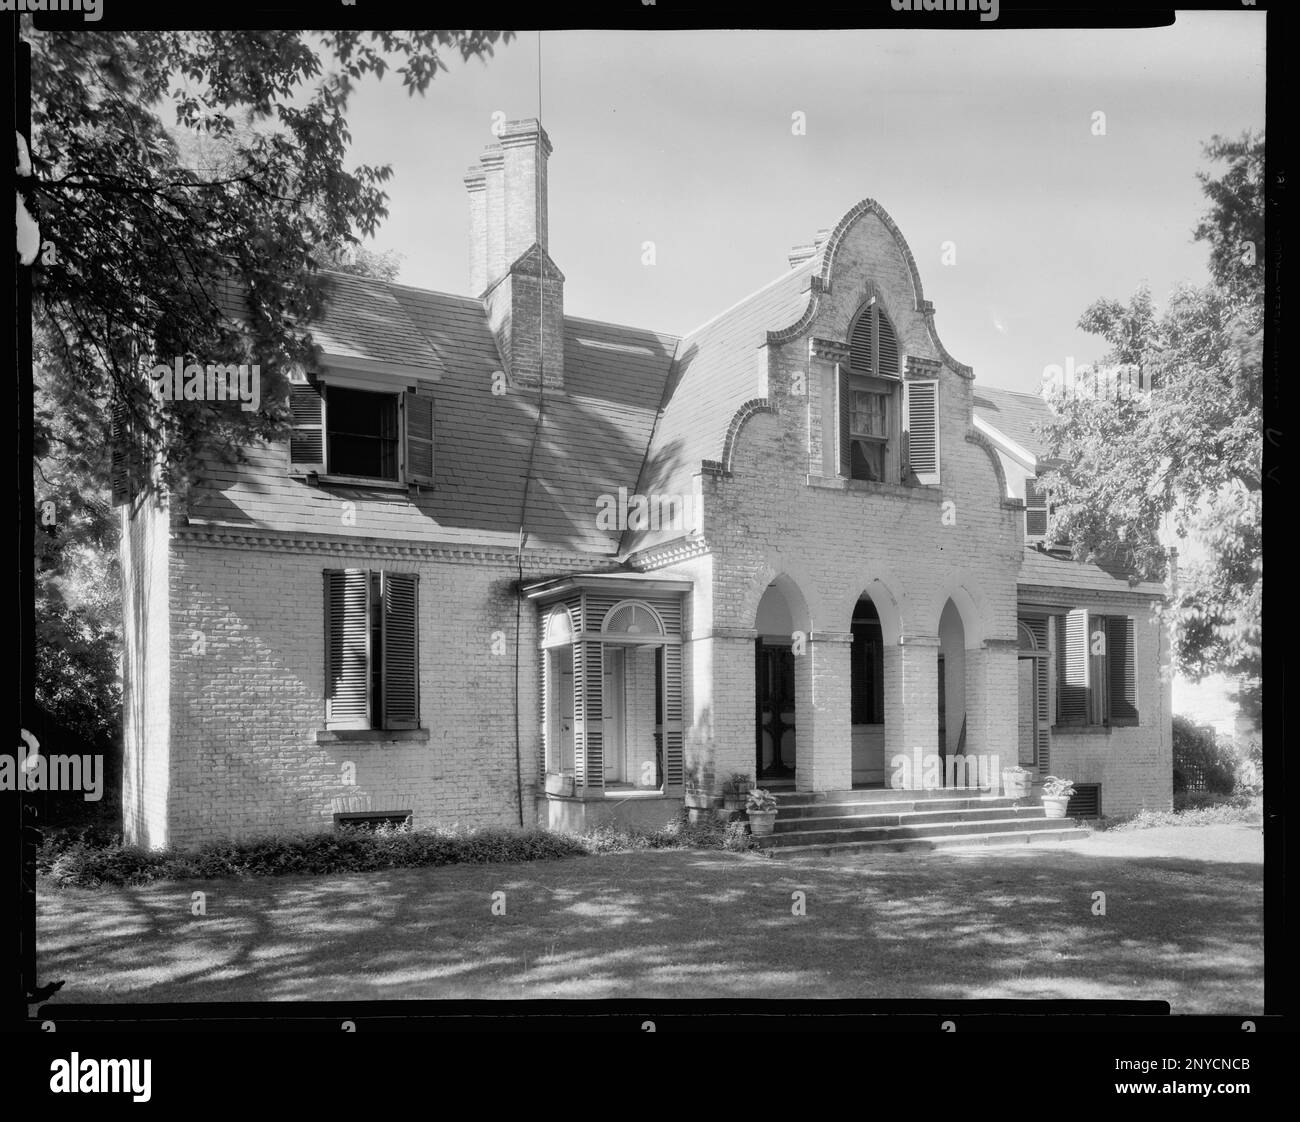 Bremo Recess, Fork Union vic., Fluvanna County, Virginia. Carnegie Survey of the Architecture of the South. Stati Uniti Virginia Fluvanna County Fork Union vic, Gables, Arches, Windows, Houses, Muratura. Foto Stock